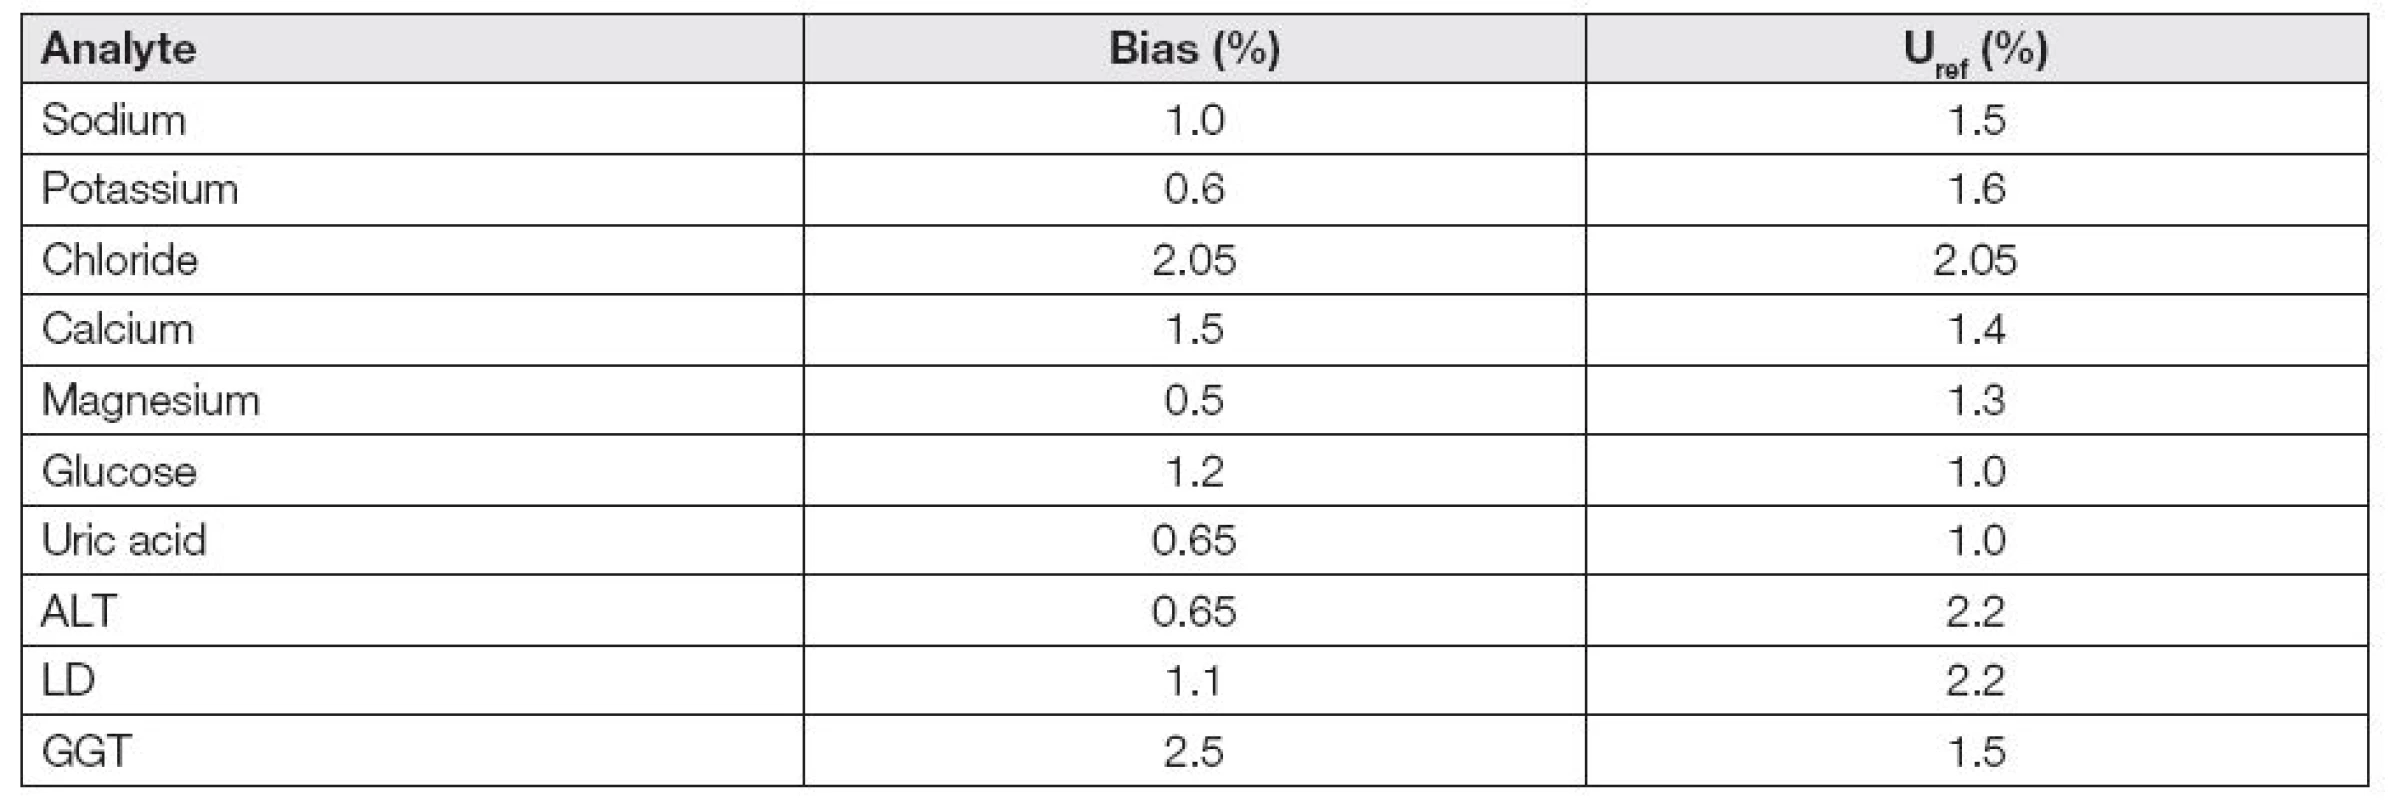 Bias and uncertainty of reference values of control material SEKK (survey AKS2/14)